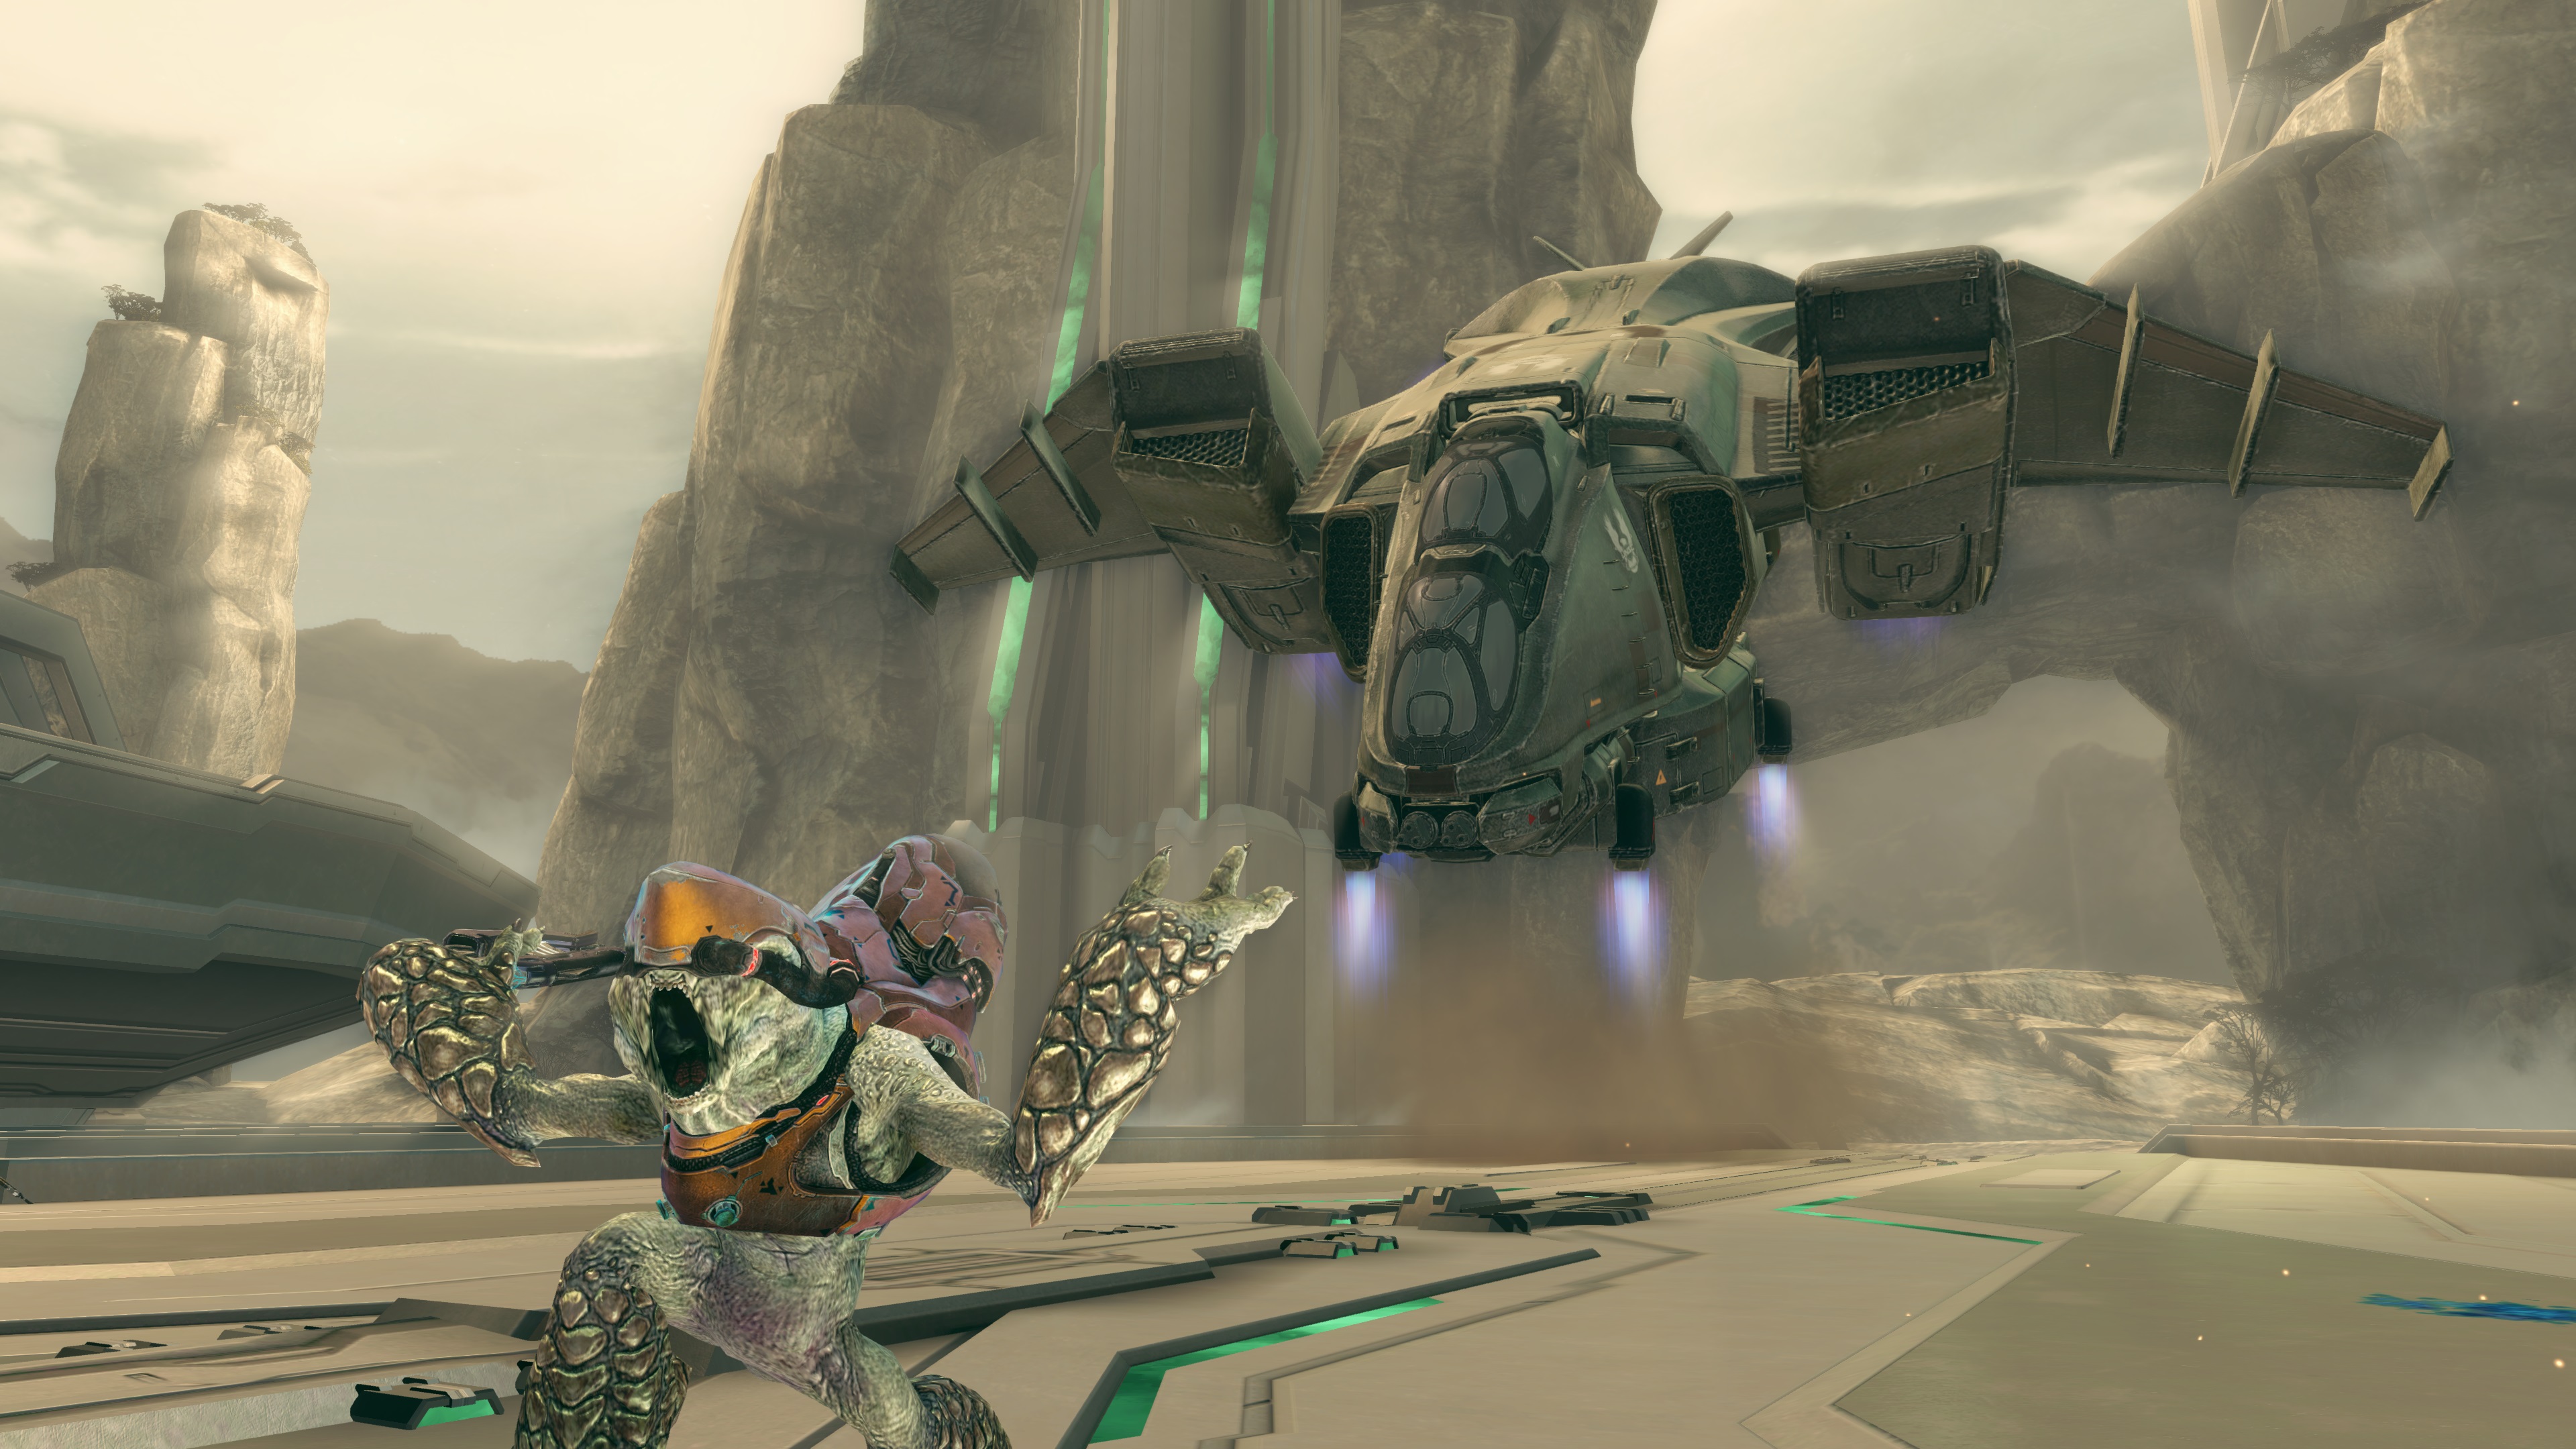 Halo 4 Spartan Ops Season One Returns with 5 New Episodes